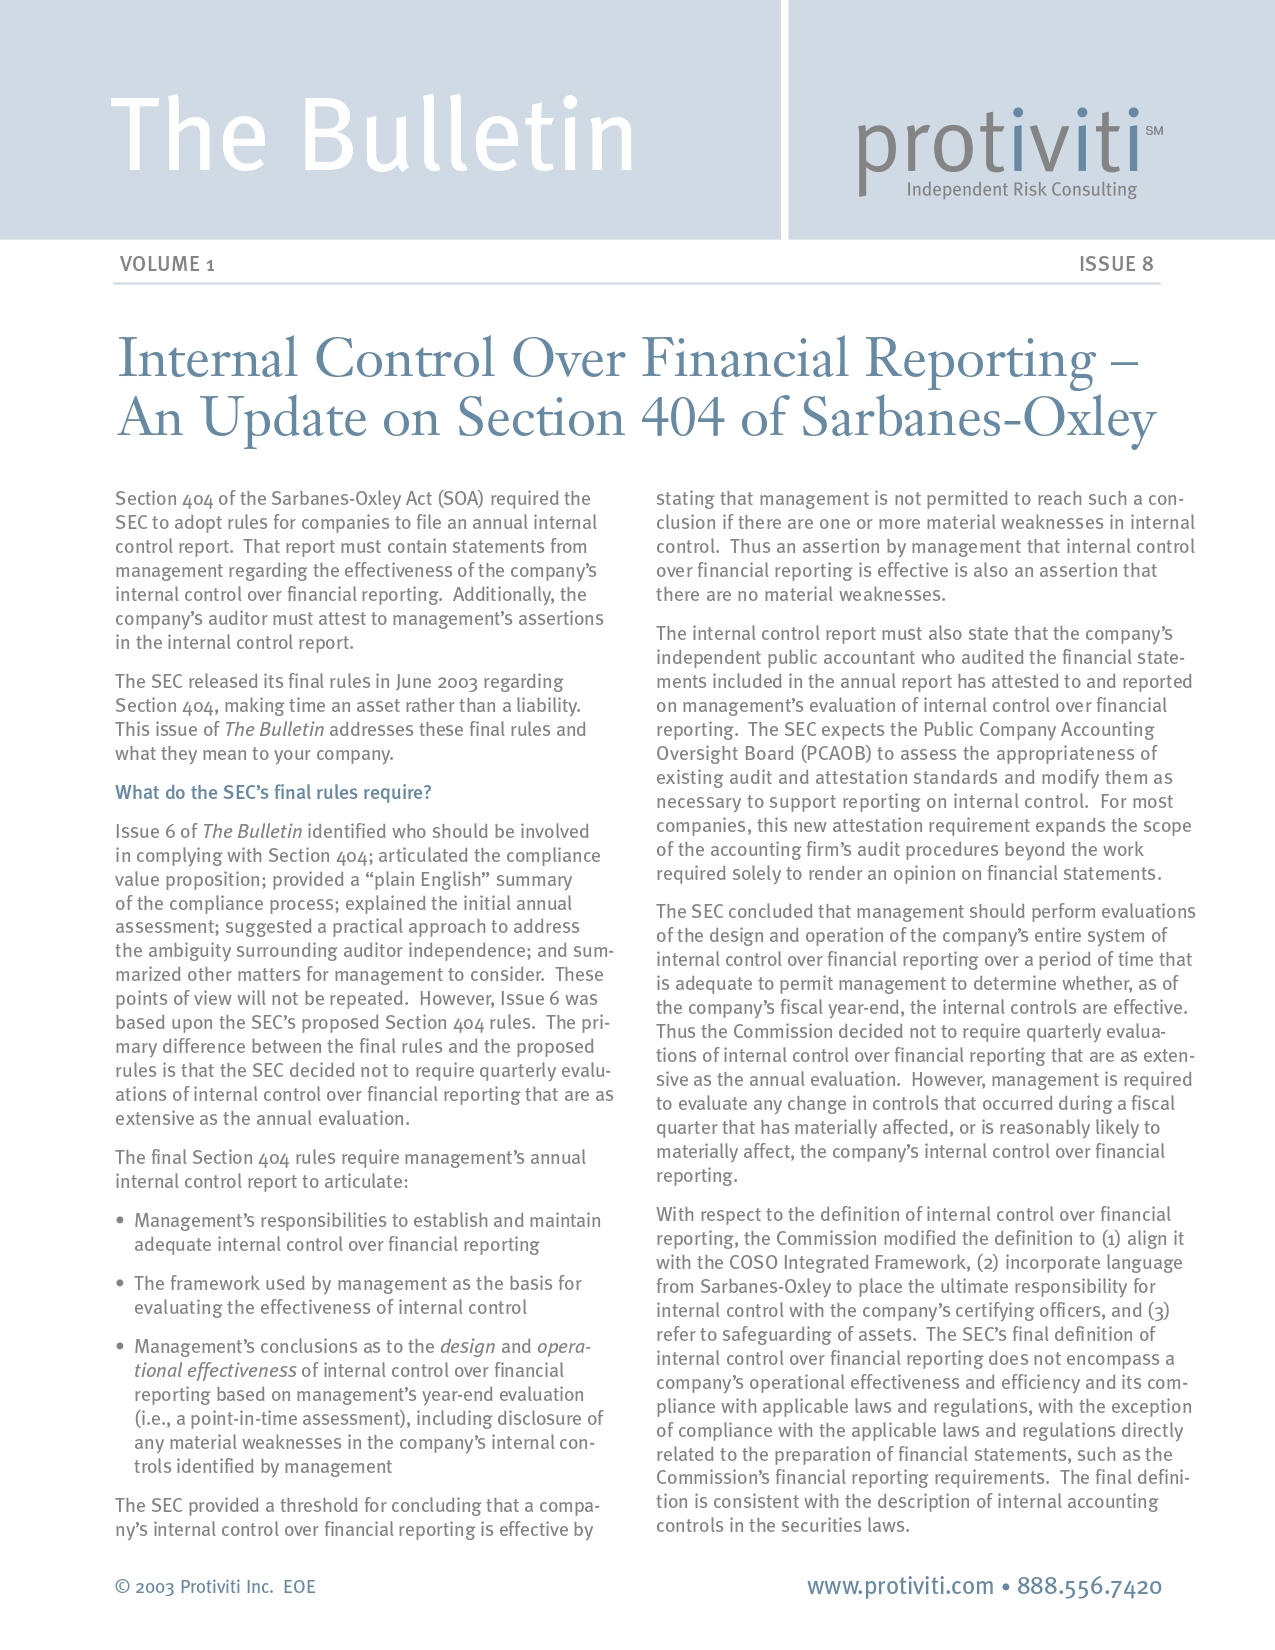 Screenshot of the first page of Internal Control Over Financial Reporting - An Update on Section 404 of Sarbanes-Oxley